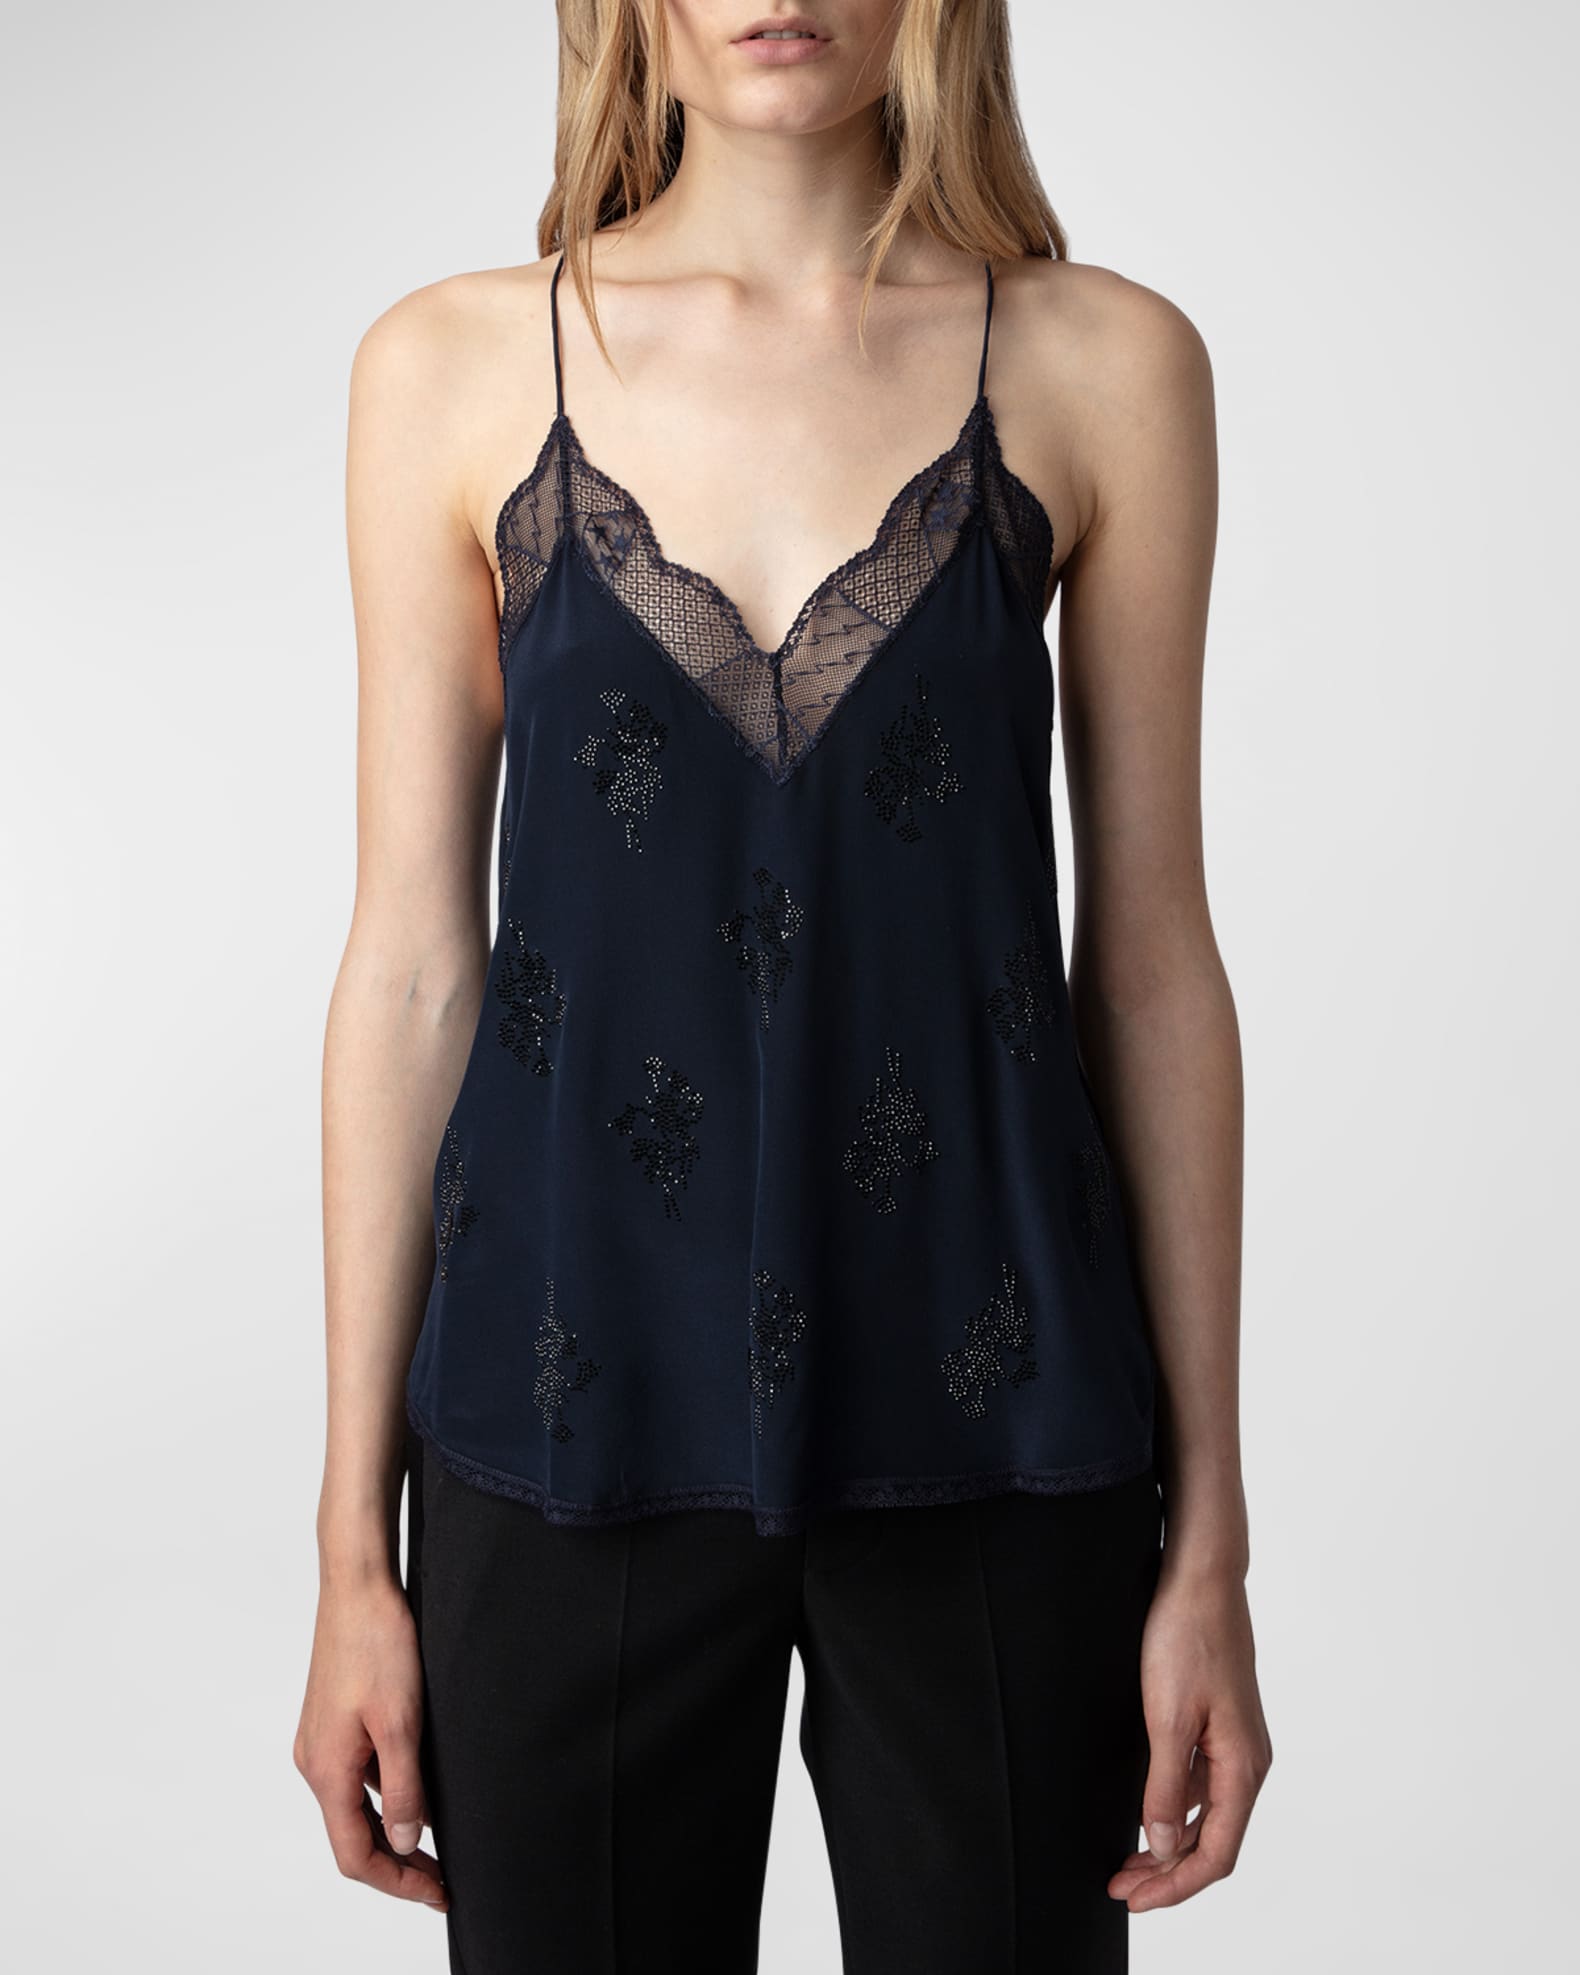 Zadig & Voltaire Christy Silk Camisole Top Blouse Tank Top Black